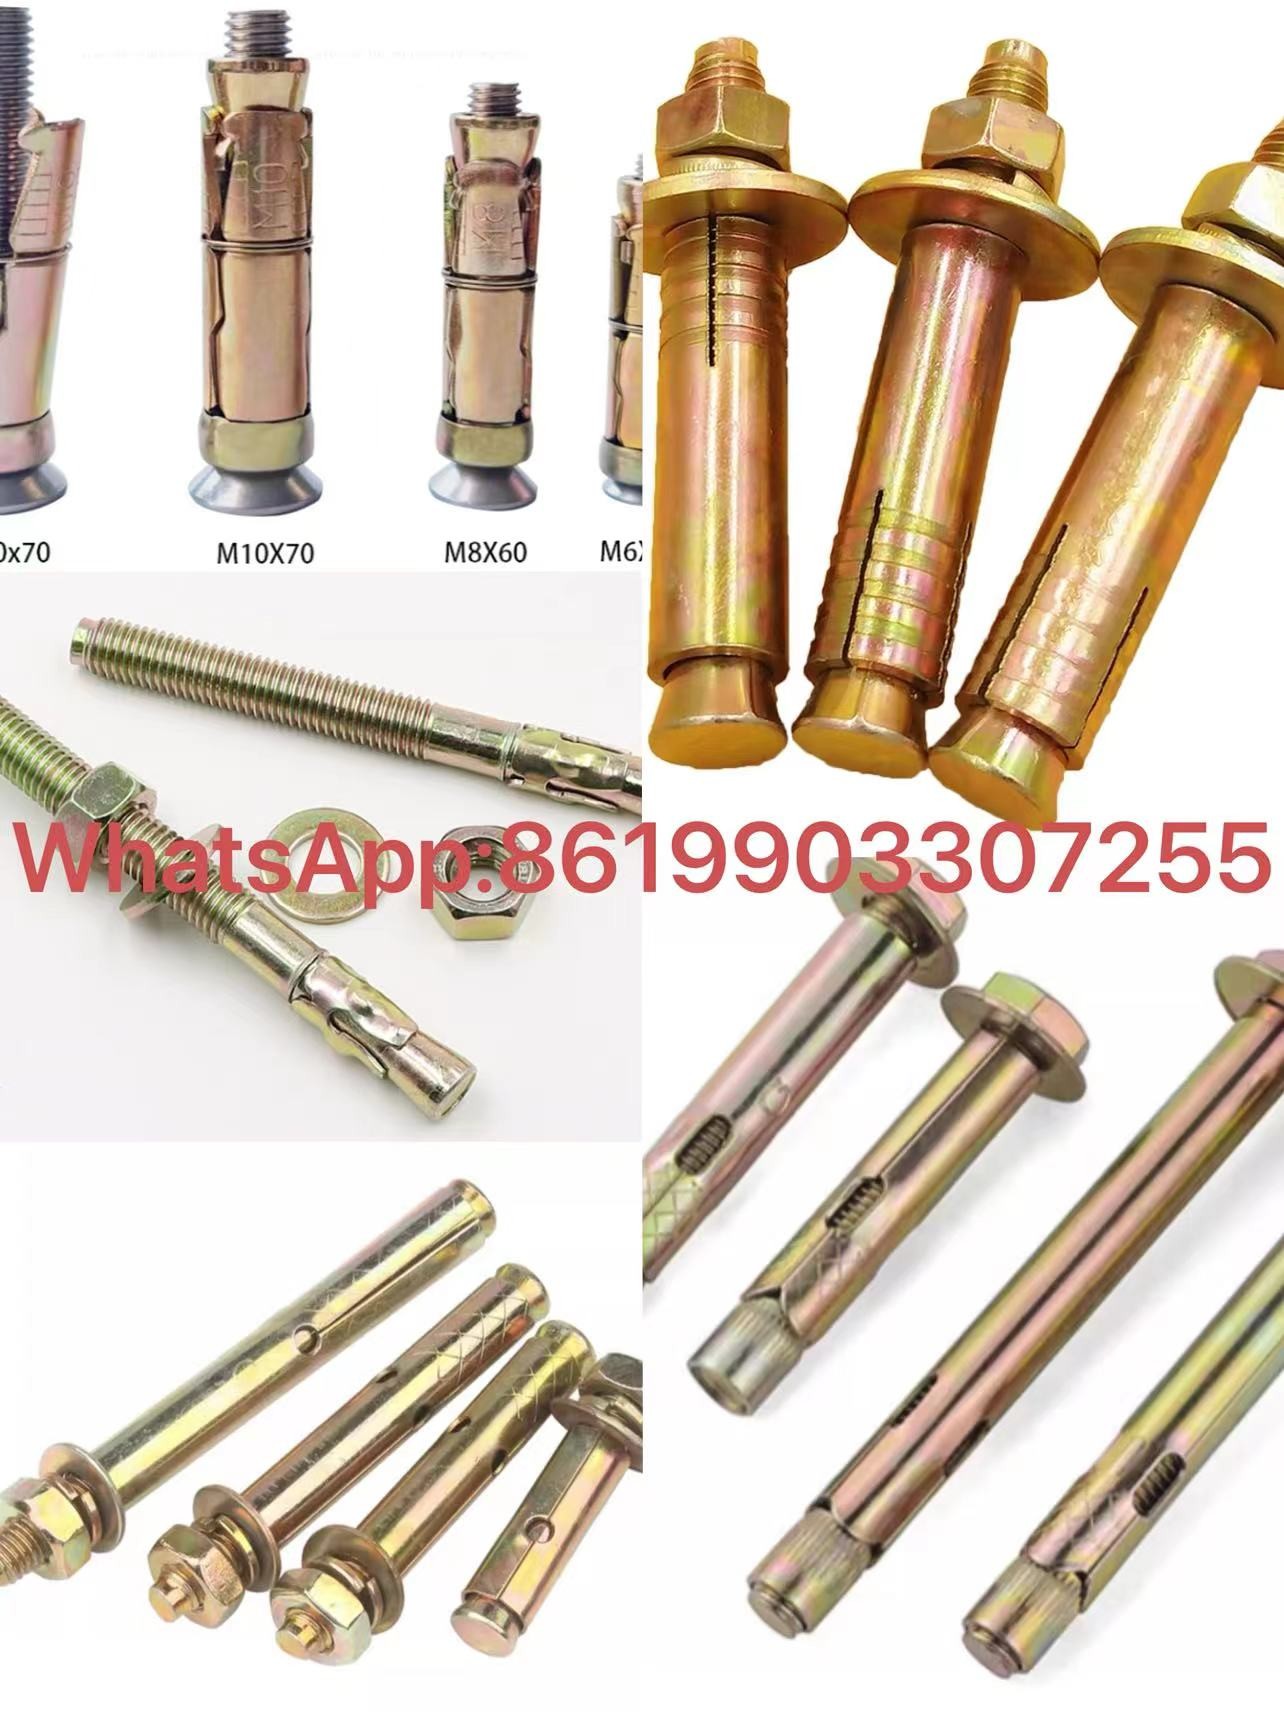 wedge anchor fastener factory support costomization Whatsapp 8619903307255-pic_1